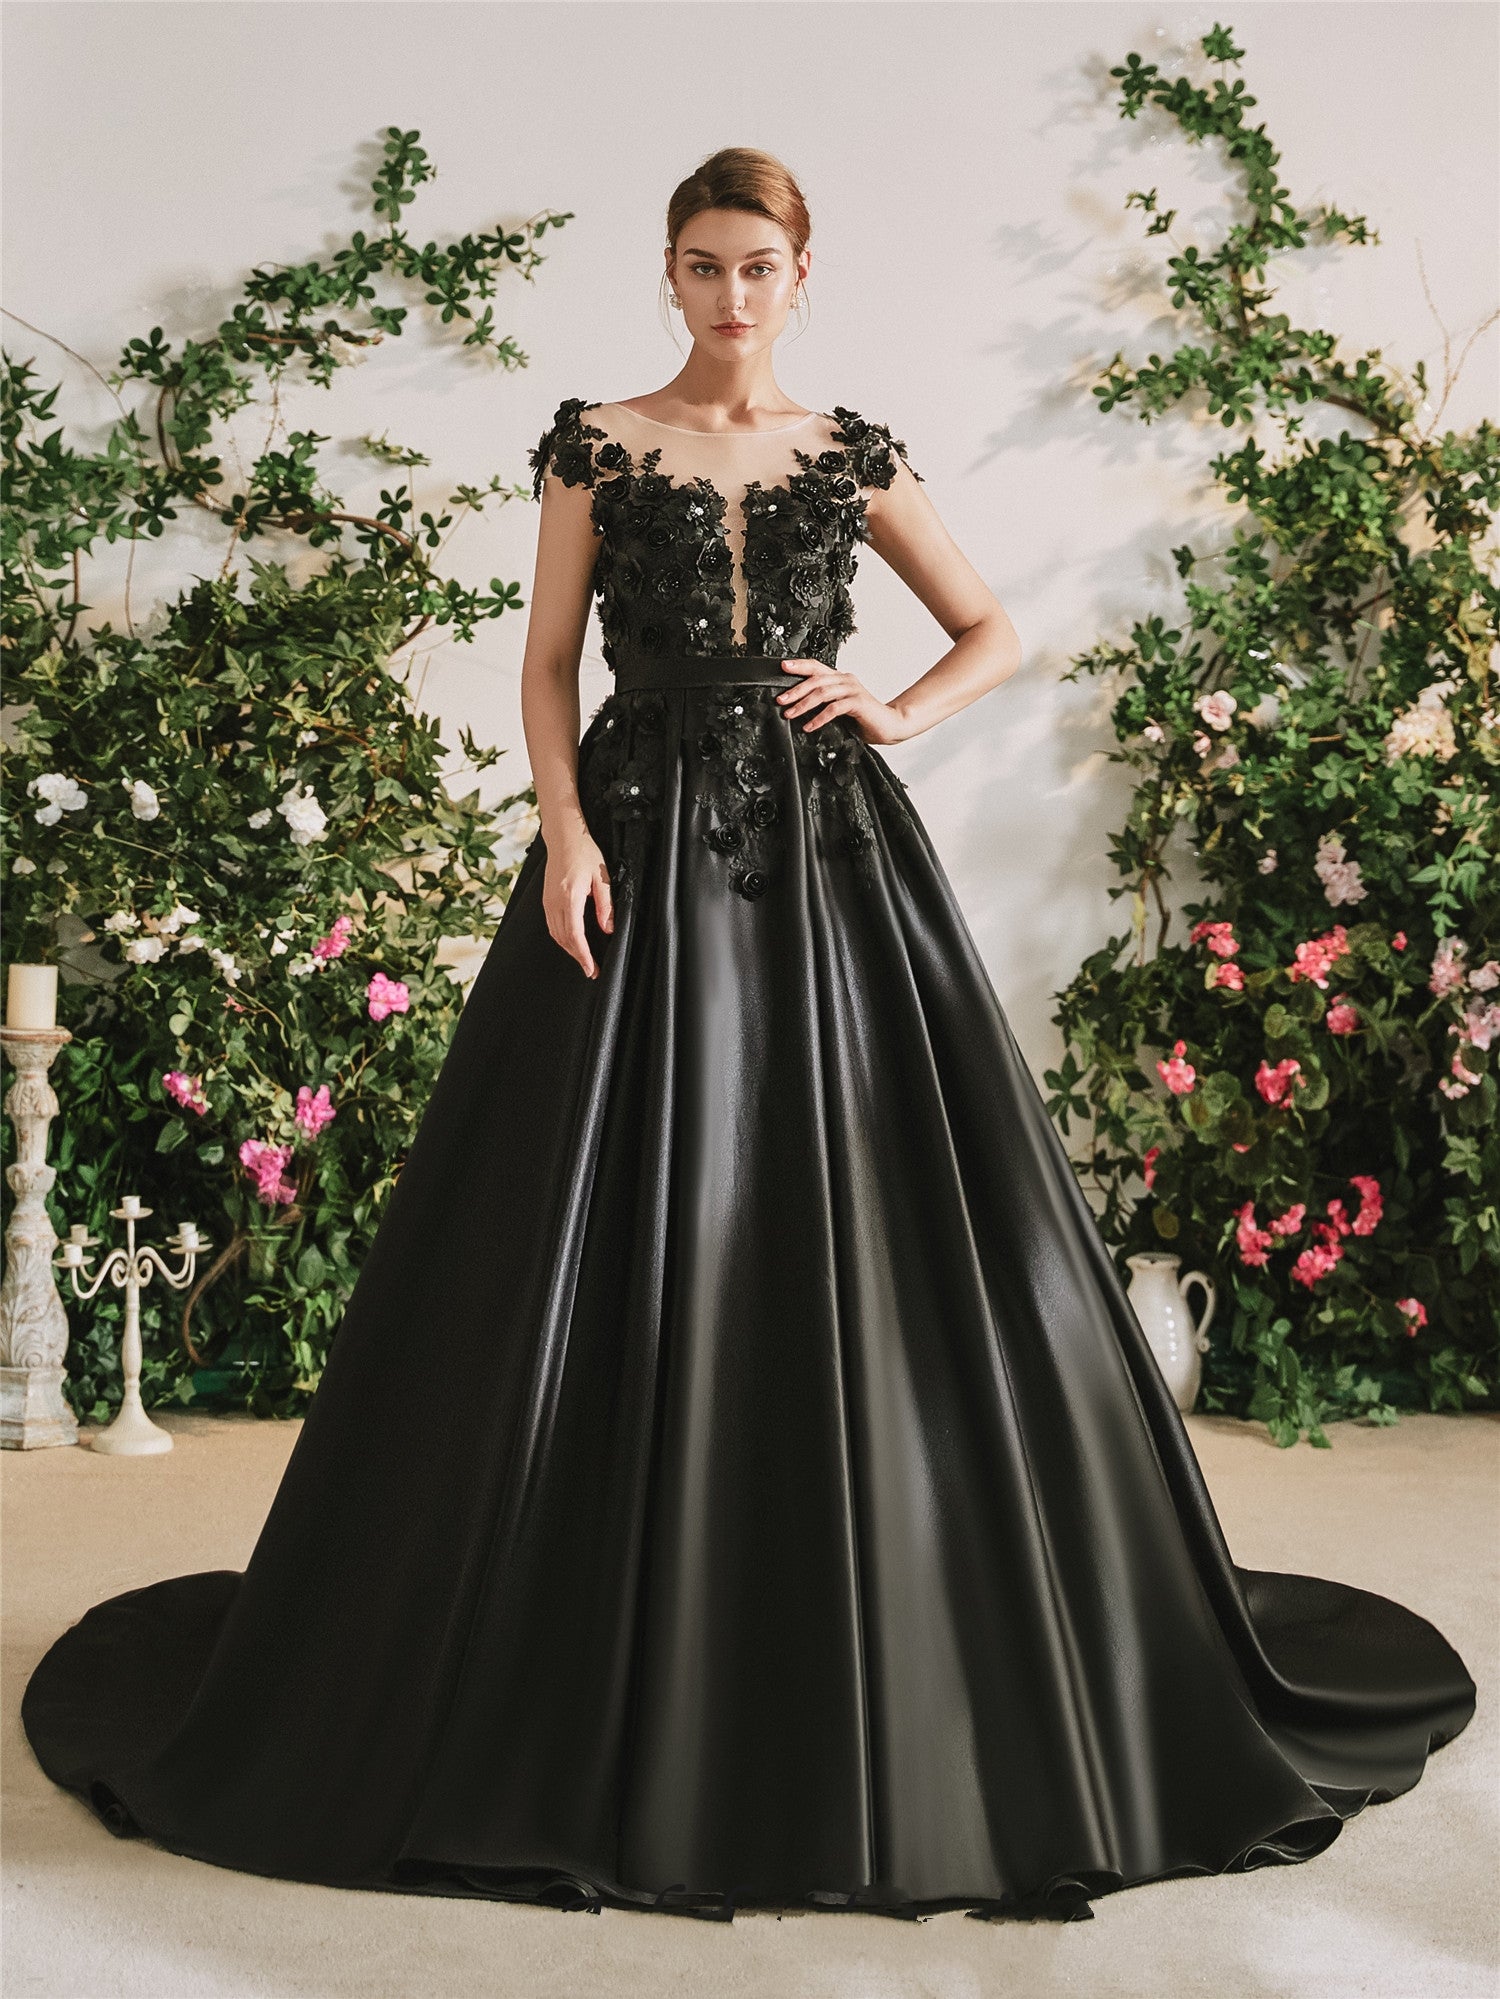 Tristyn Black Lace Ball Gown Wedding Dress | Maggie Sottero